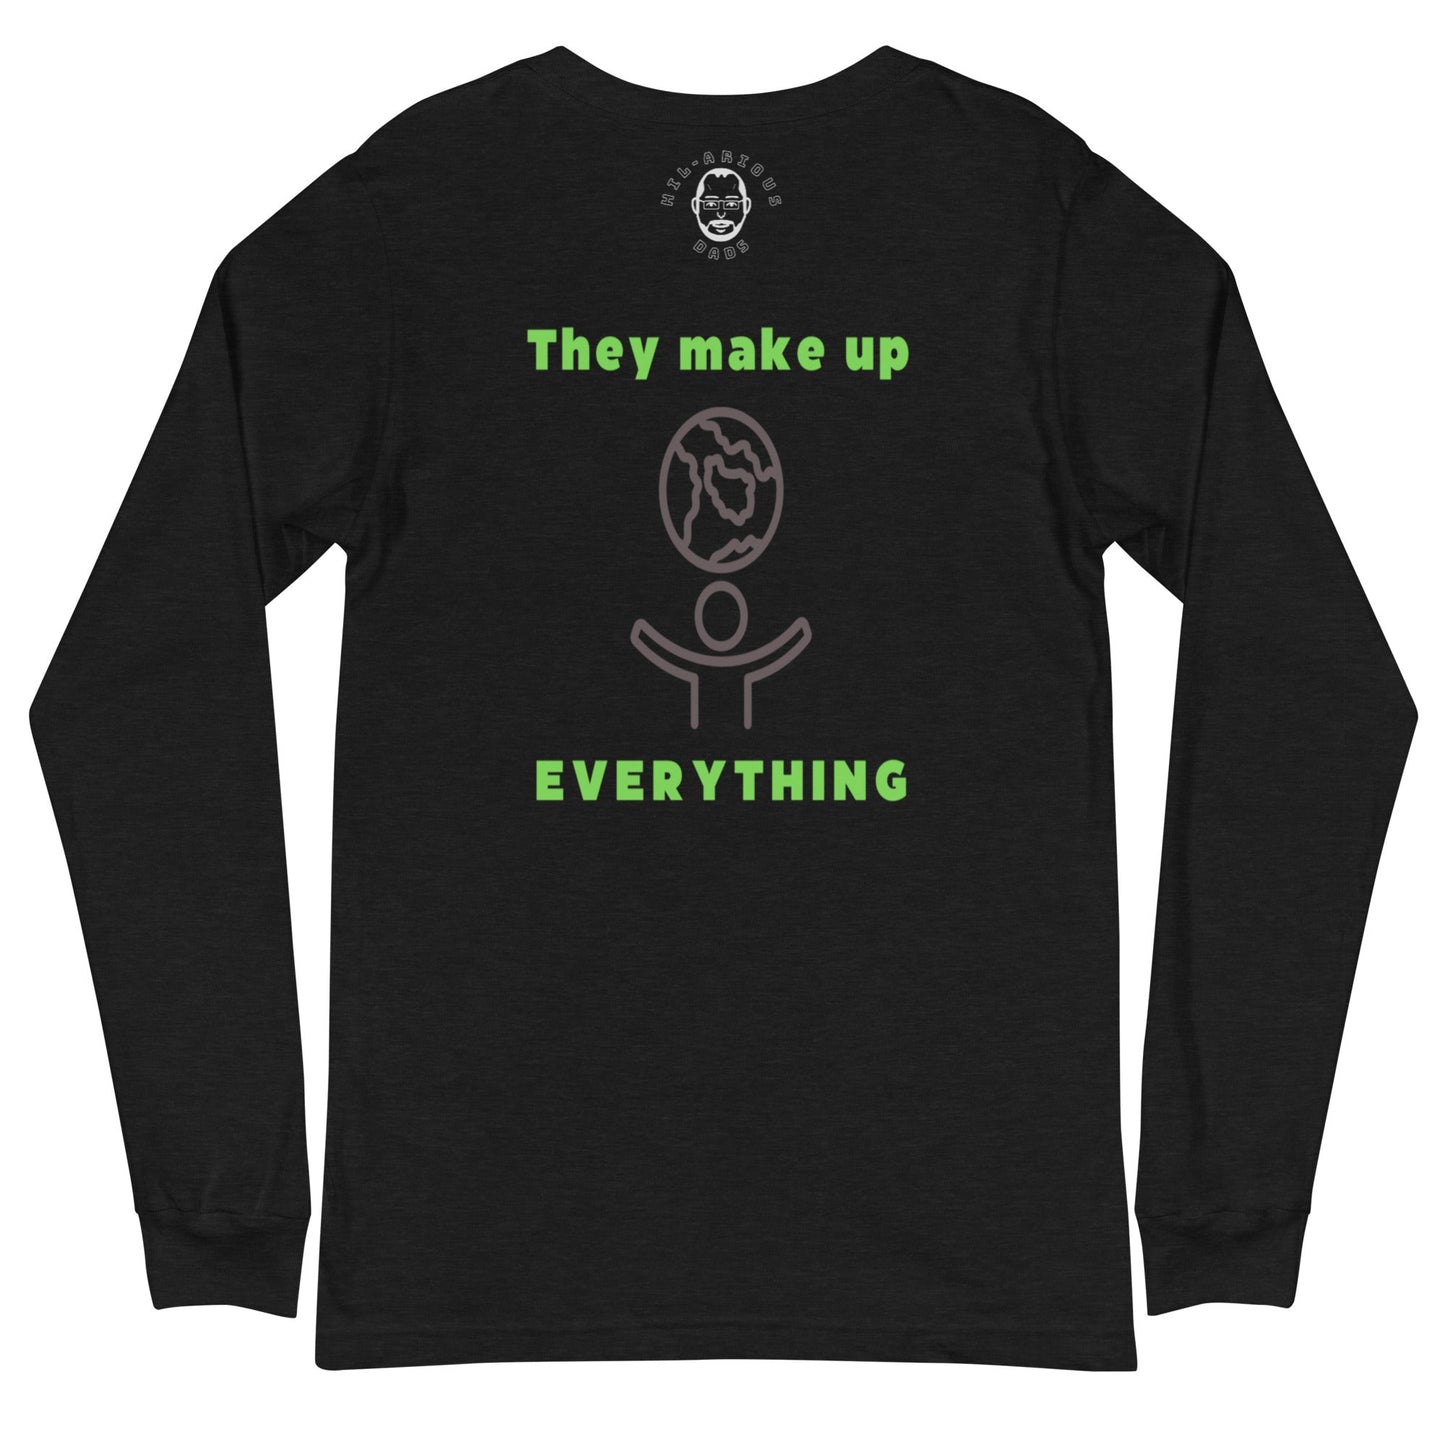 Don't trust atoms-Long Sleeve Tee - Hil-arious Dads